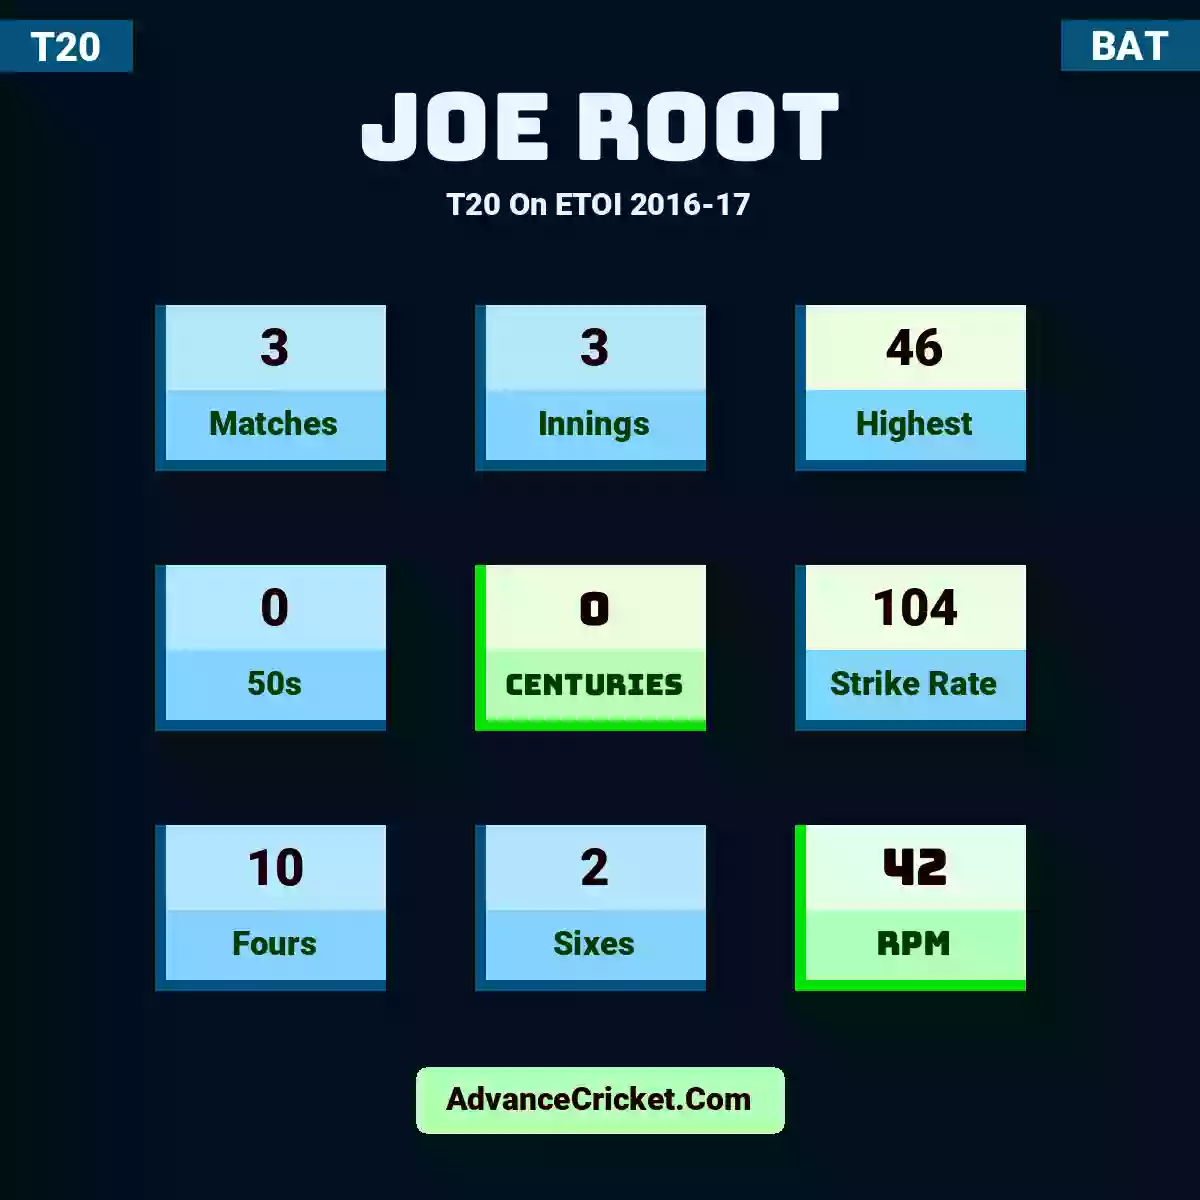 Joe Root T20  On ETOI 2016-17, Joe Root played 3 matches, scored 46 runs as highest, 0 half-centuries, and 0 centuries, with a strike rate of 104. J.Root hit 10 fours and 2 sixes, with an RPM of 42.